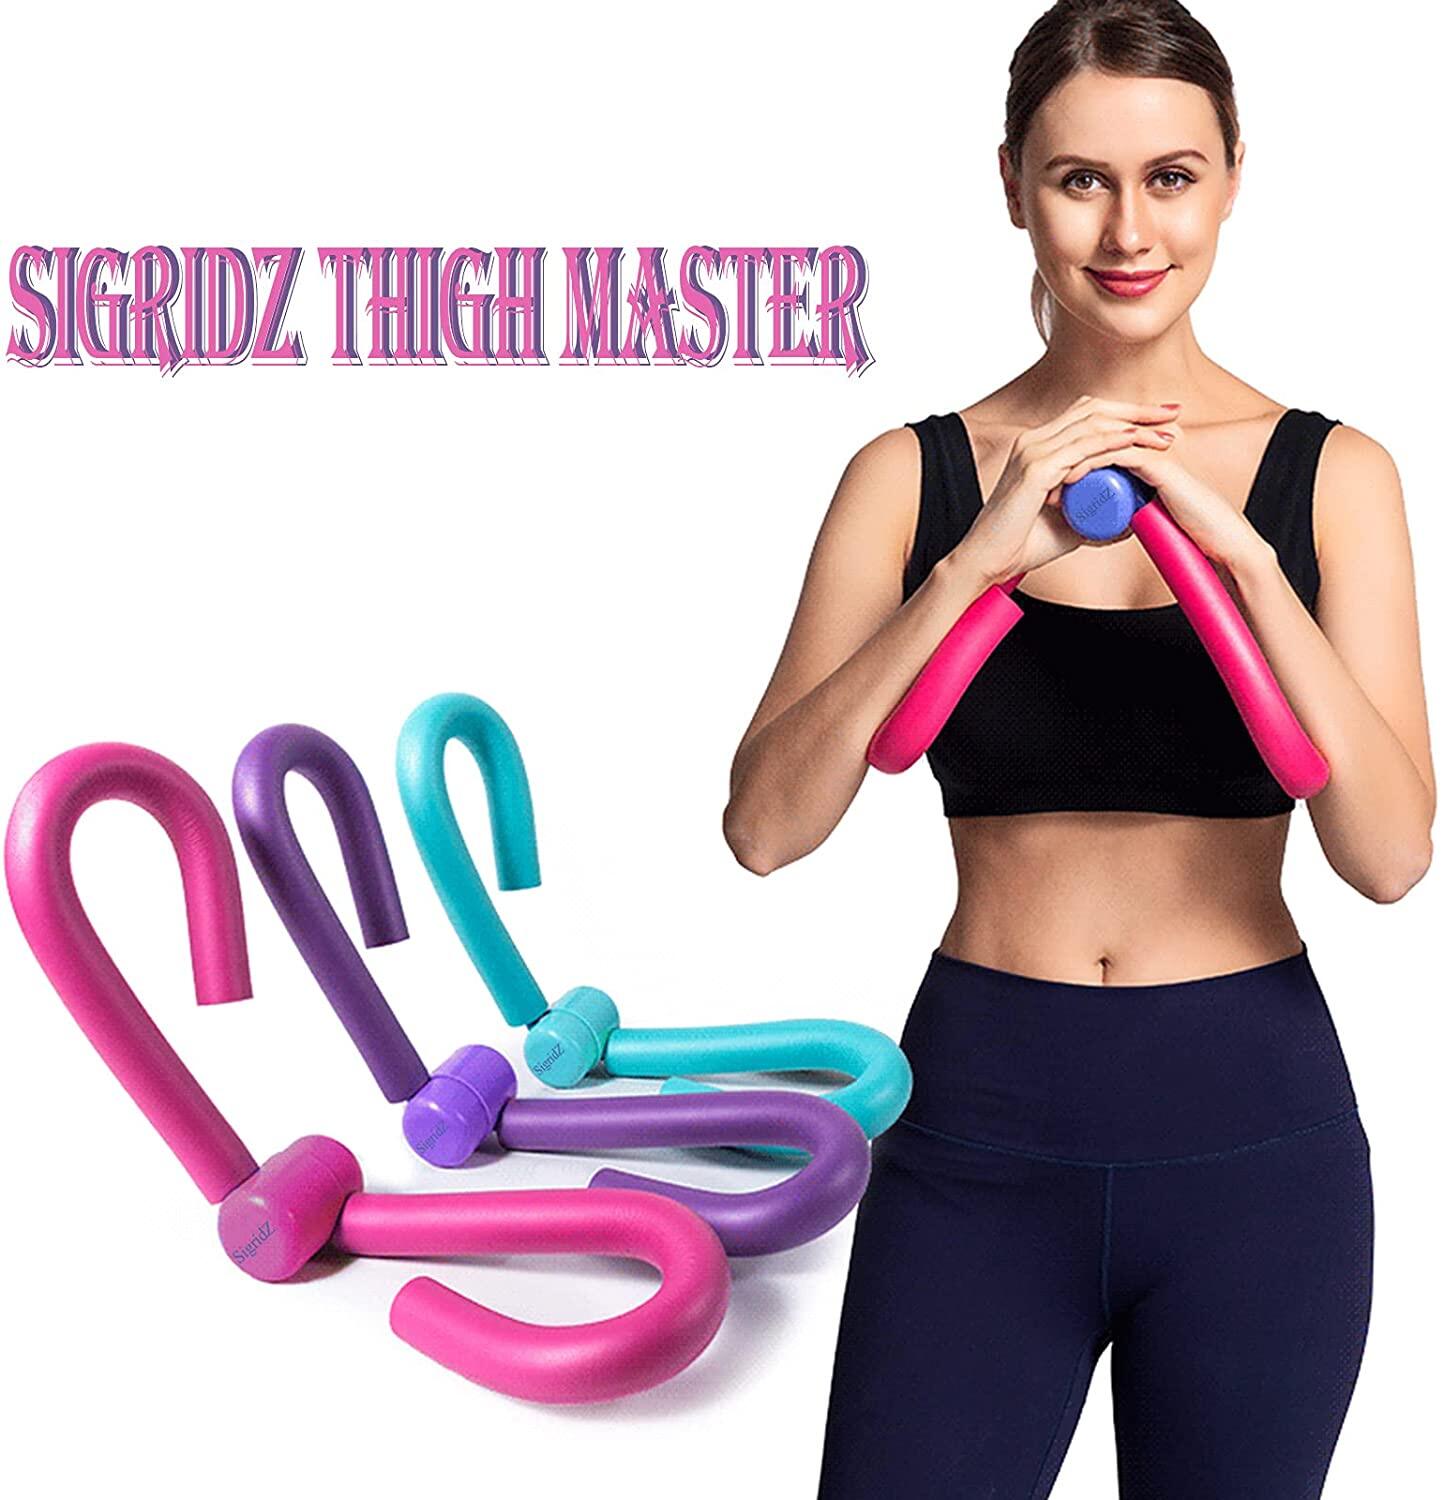 Thigh Master Workout Exerciser Thigh Toner Trimmer Butt Leg Arm Chest Toner Thin Thigh and Leg Shaping Used in Home Gym to Weight Loss 